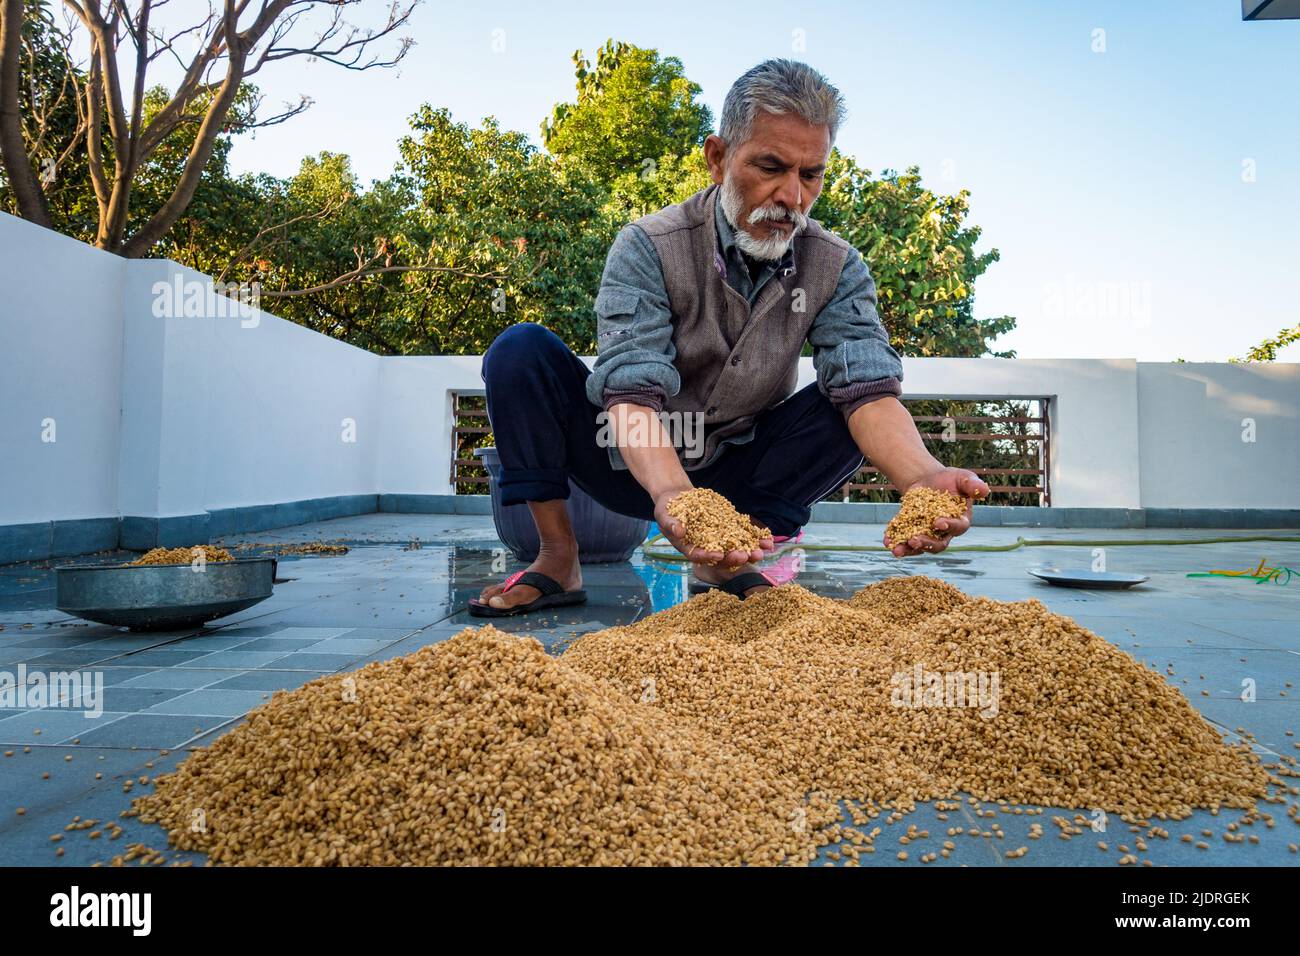 Dehradun City Uttarakhand India. March 21st, 2022. Indian Man processing wheat post-harvest. Wetting and Drying process. Stock Photo